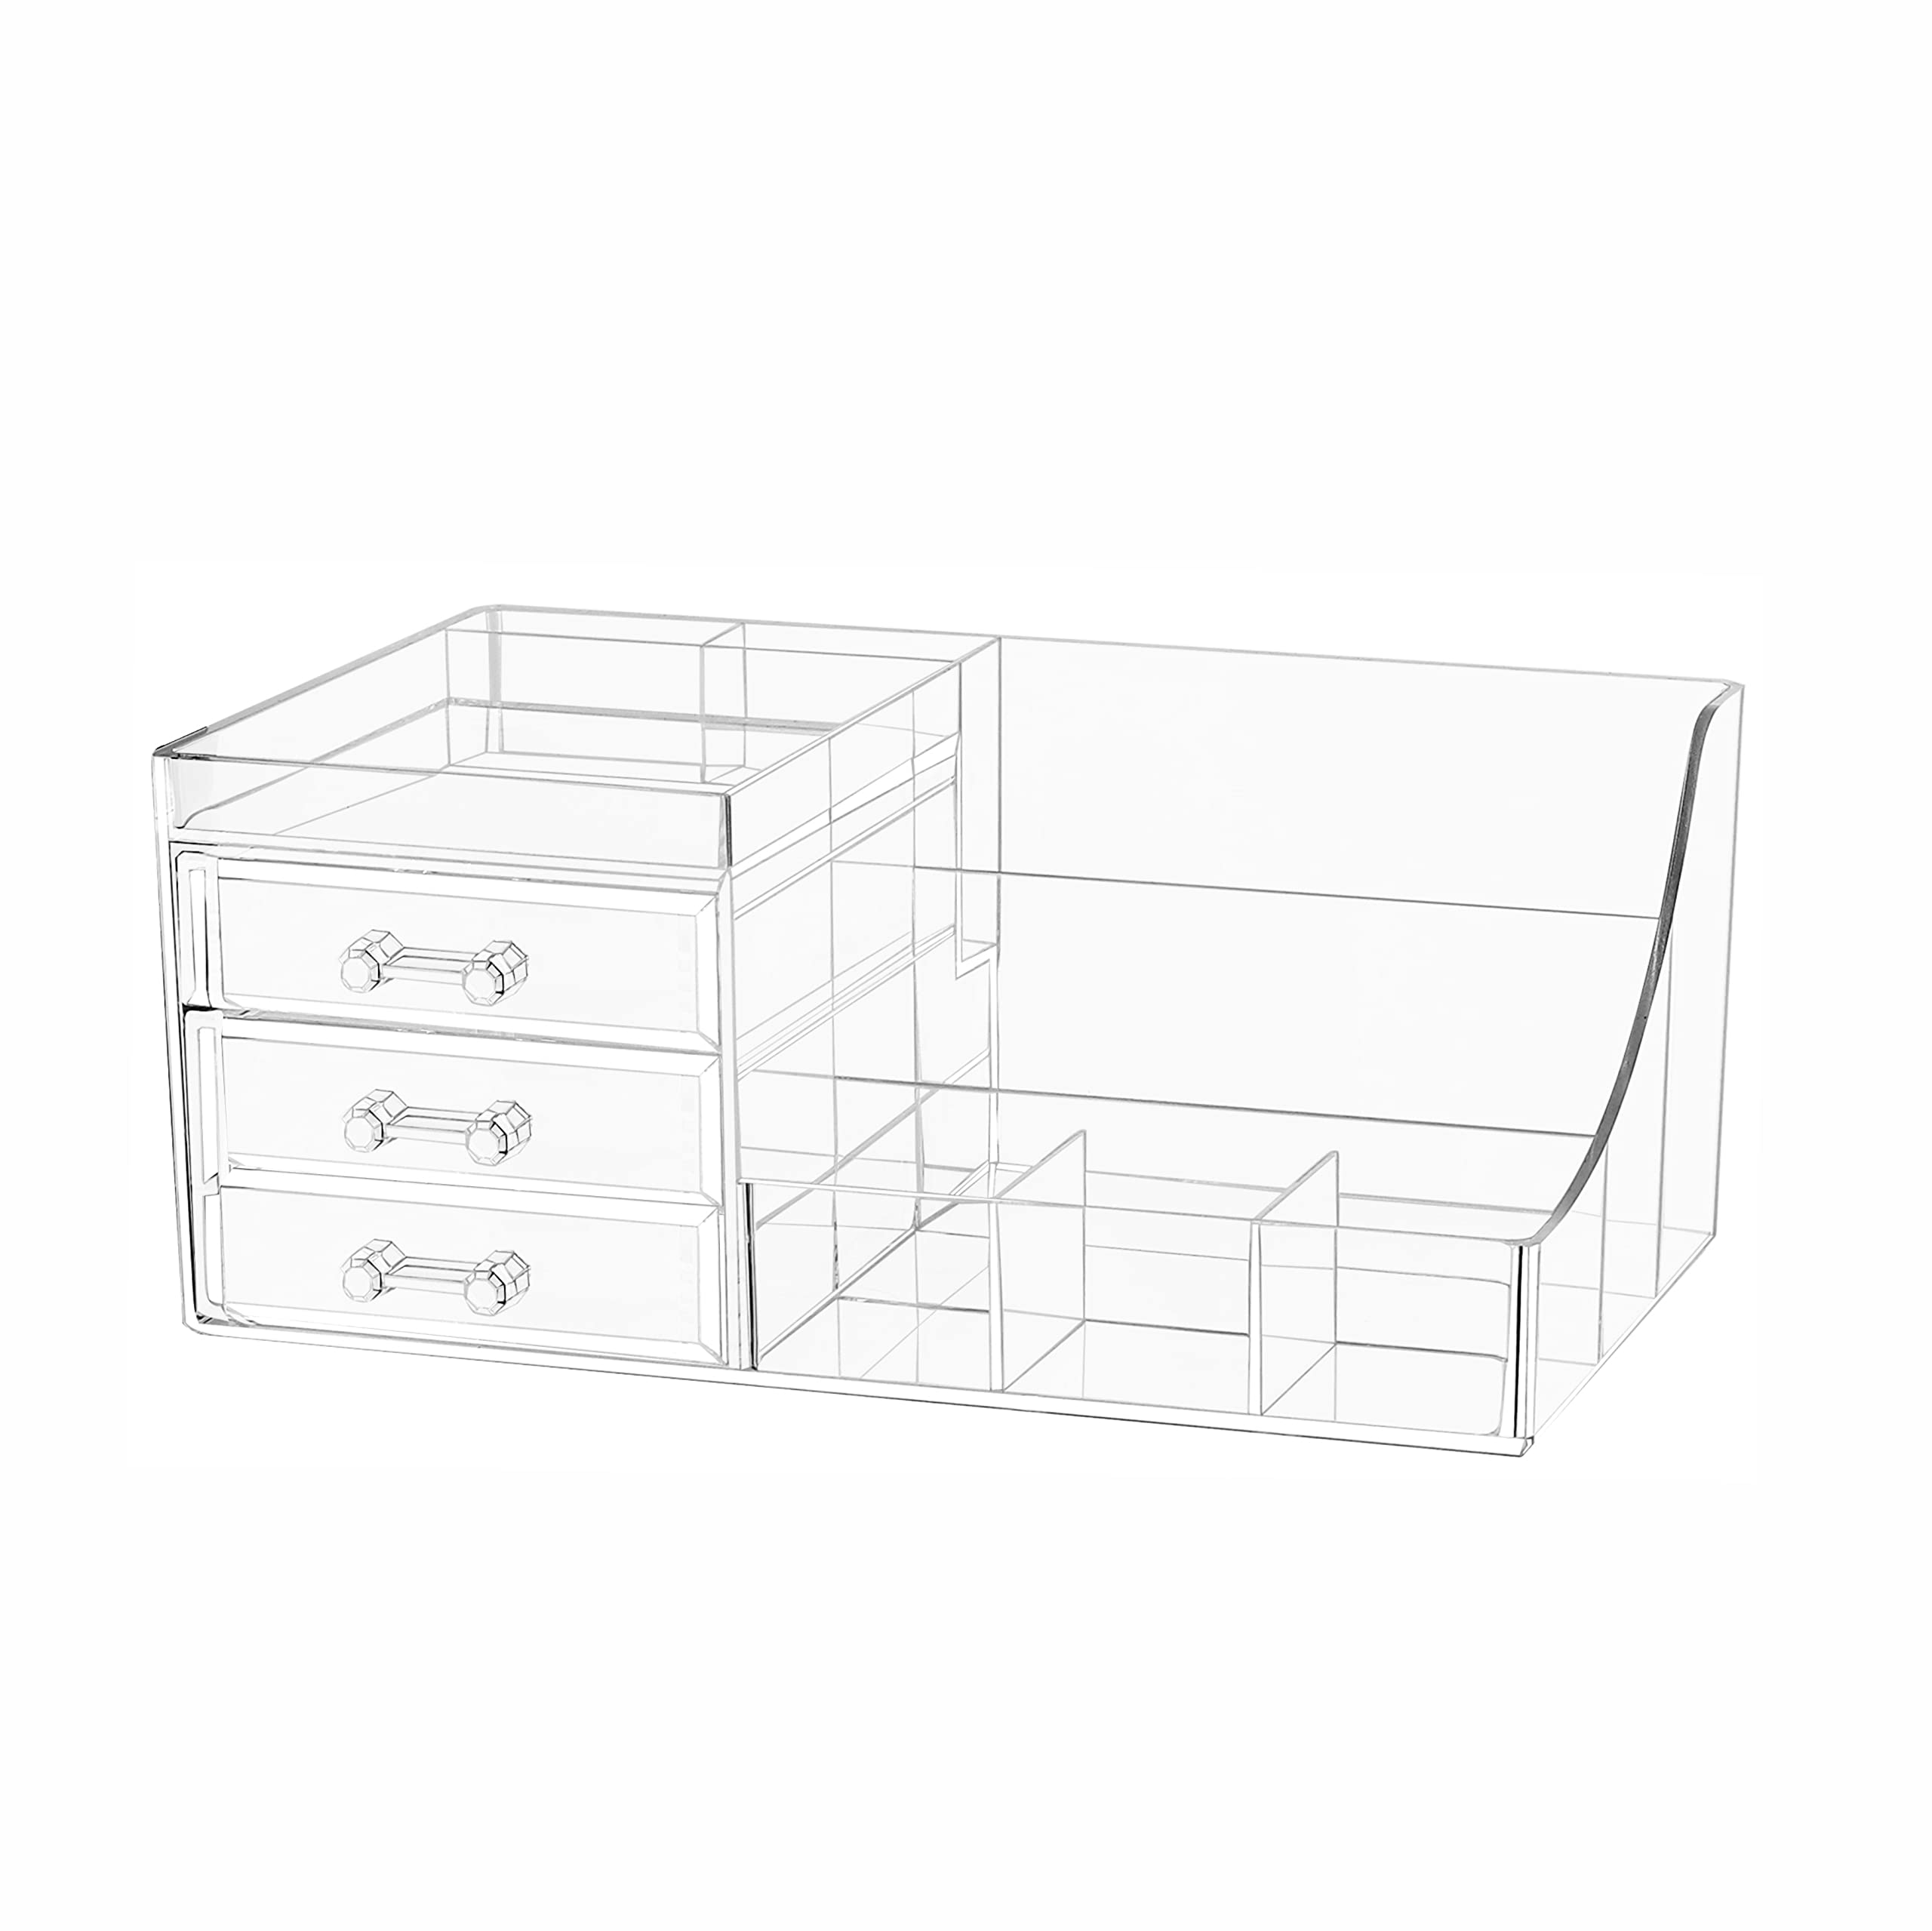 Stackable Makeup Organizer With Storage Drawers, Acrylic Bathroom